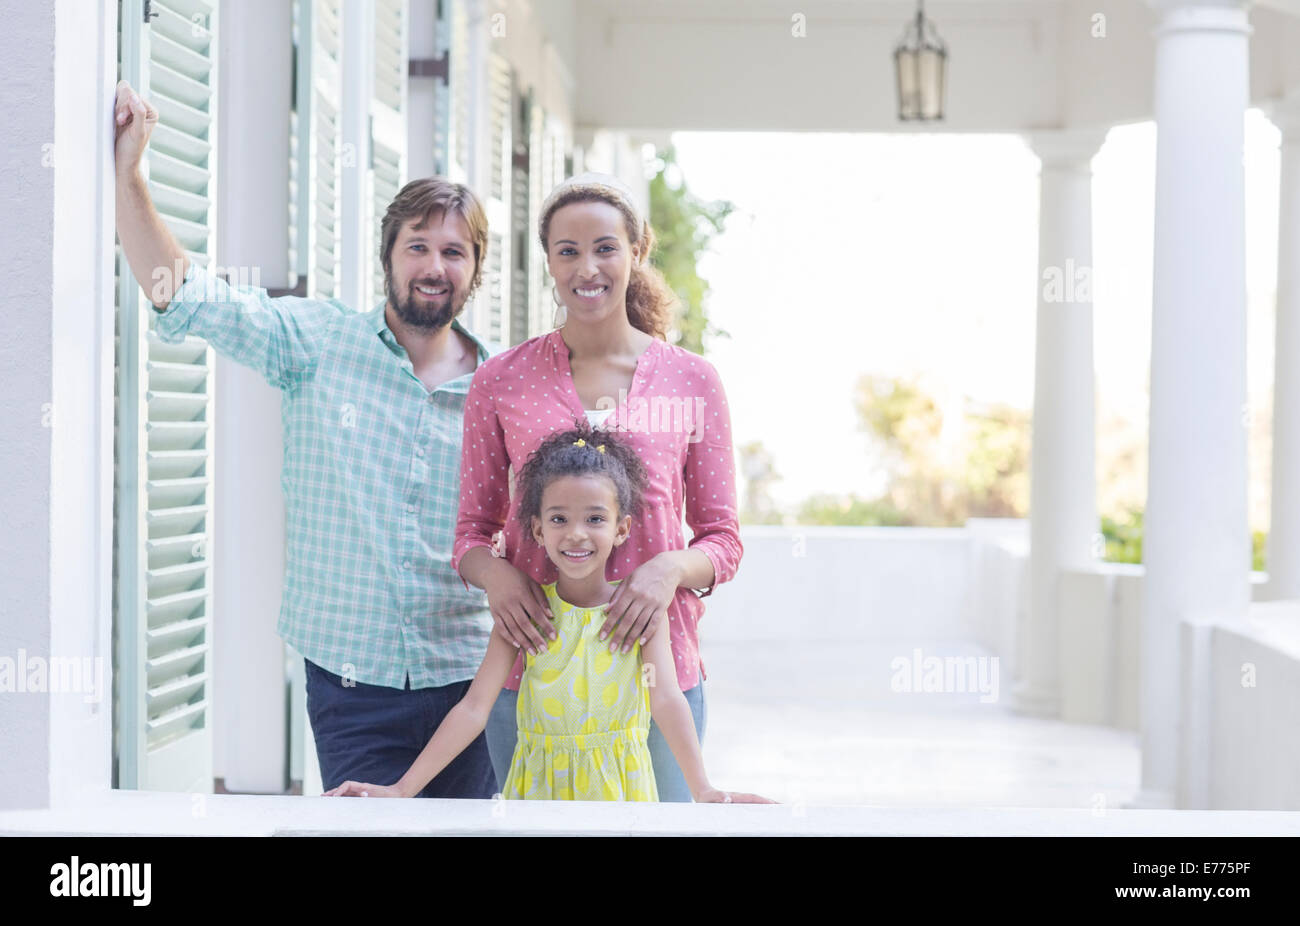 Family smiling on porch together Stock Photo